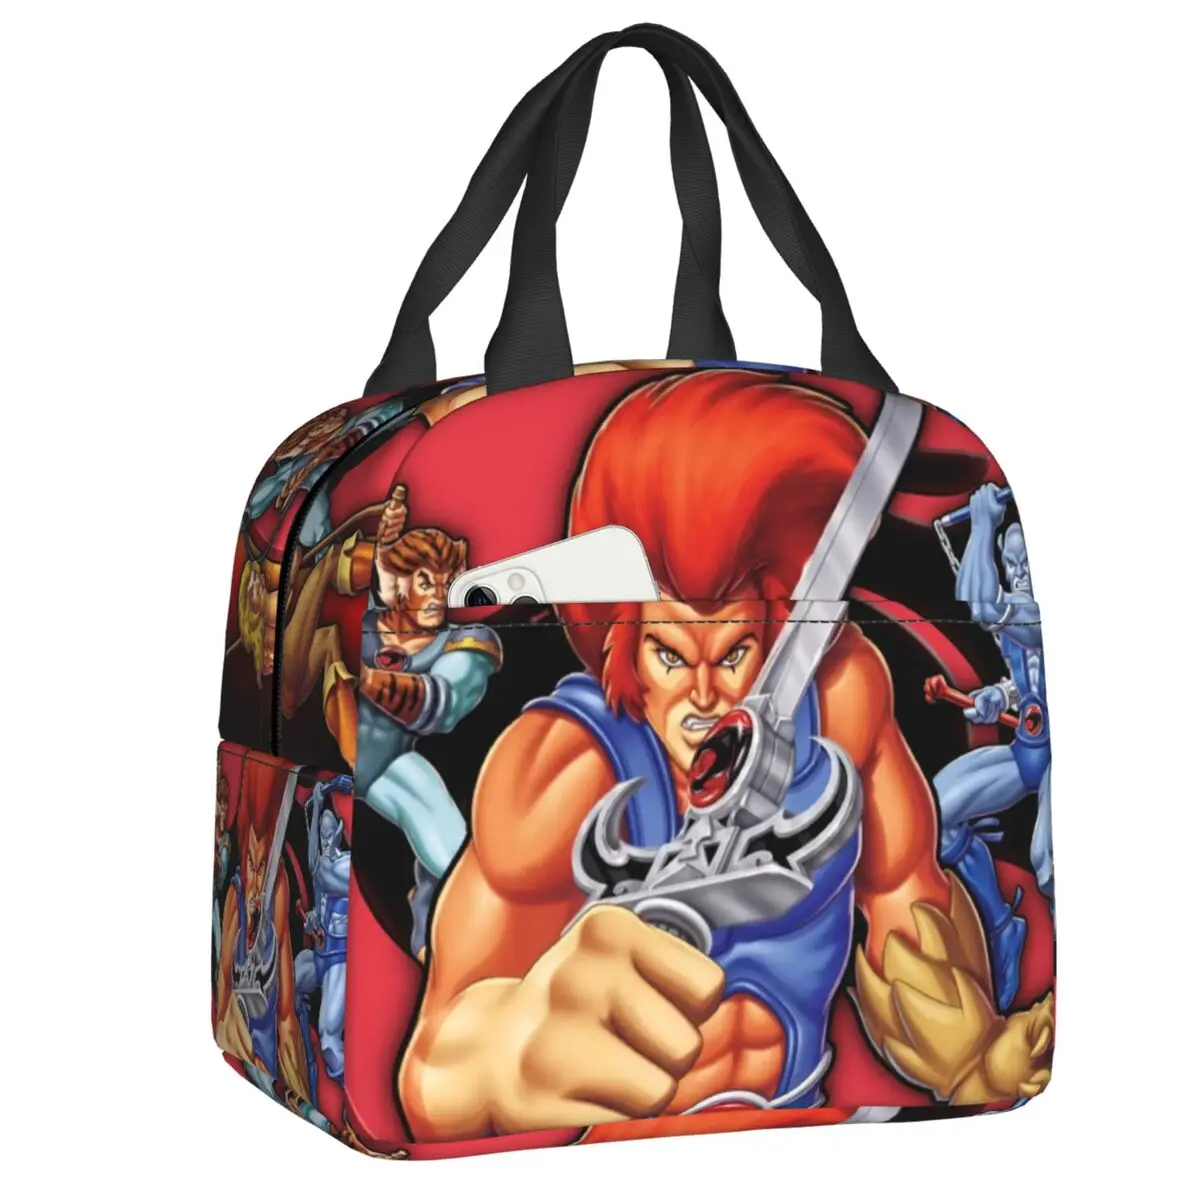 

Anime Thundercats Lunch Box HiMan Cheetara Thermal Cooler Food Insulated Lunch Bag for Women Picnic Reusable Tote Bags